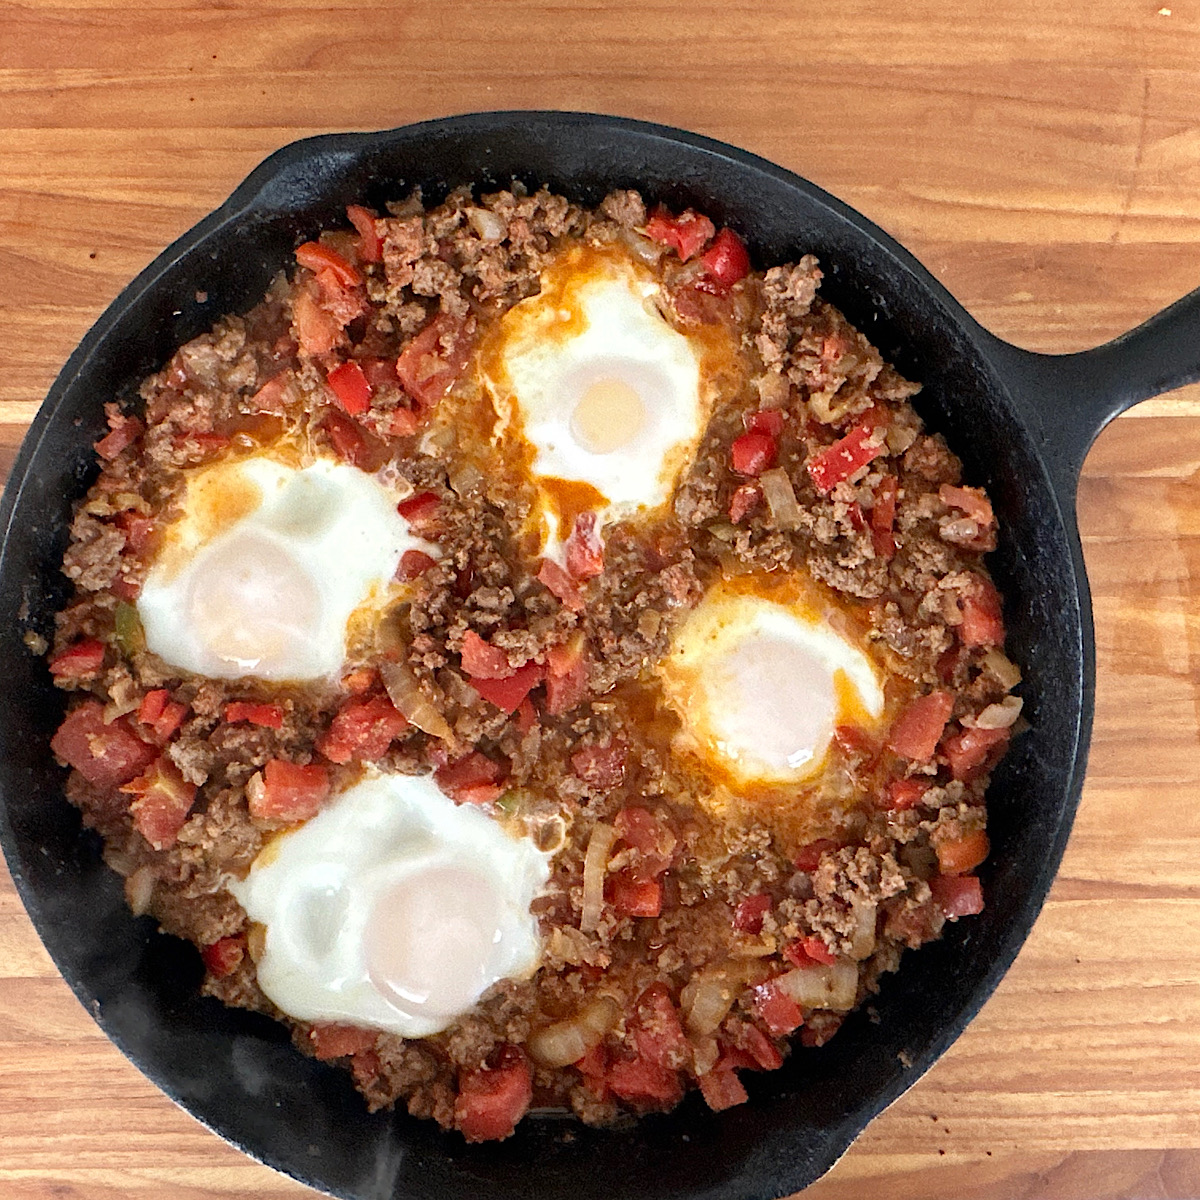 Finished dish of chorizo and eggs in a skillet.